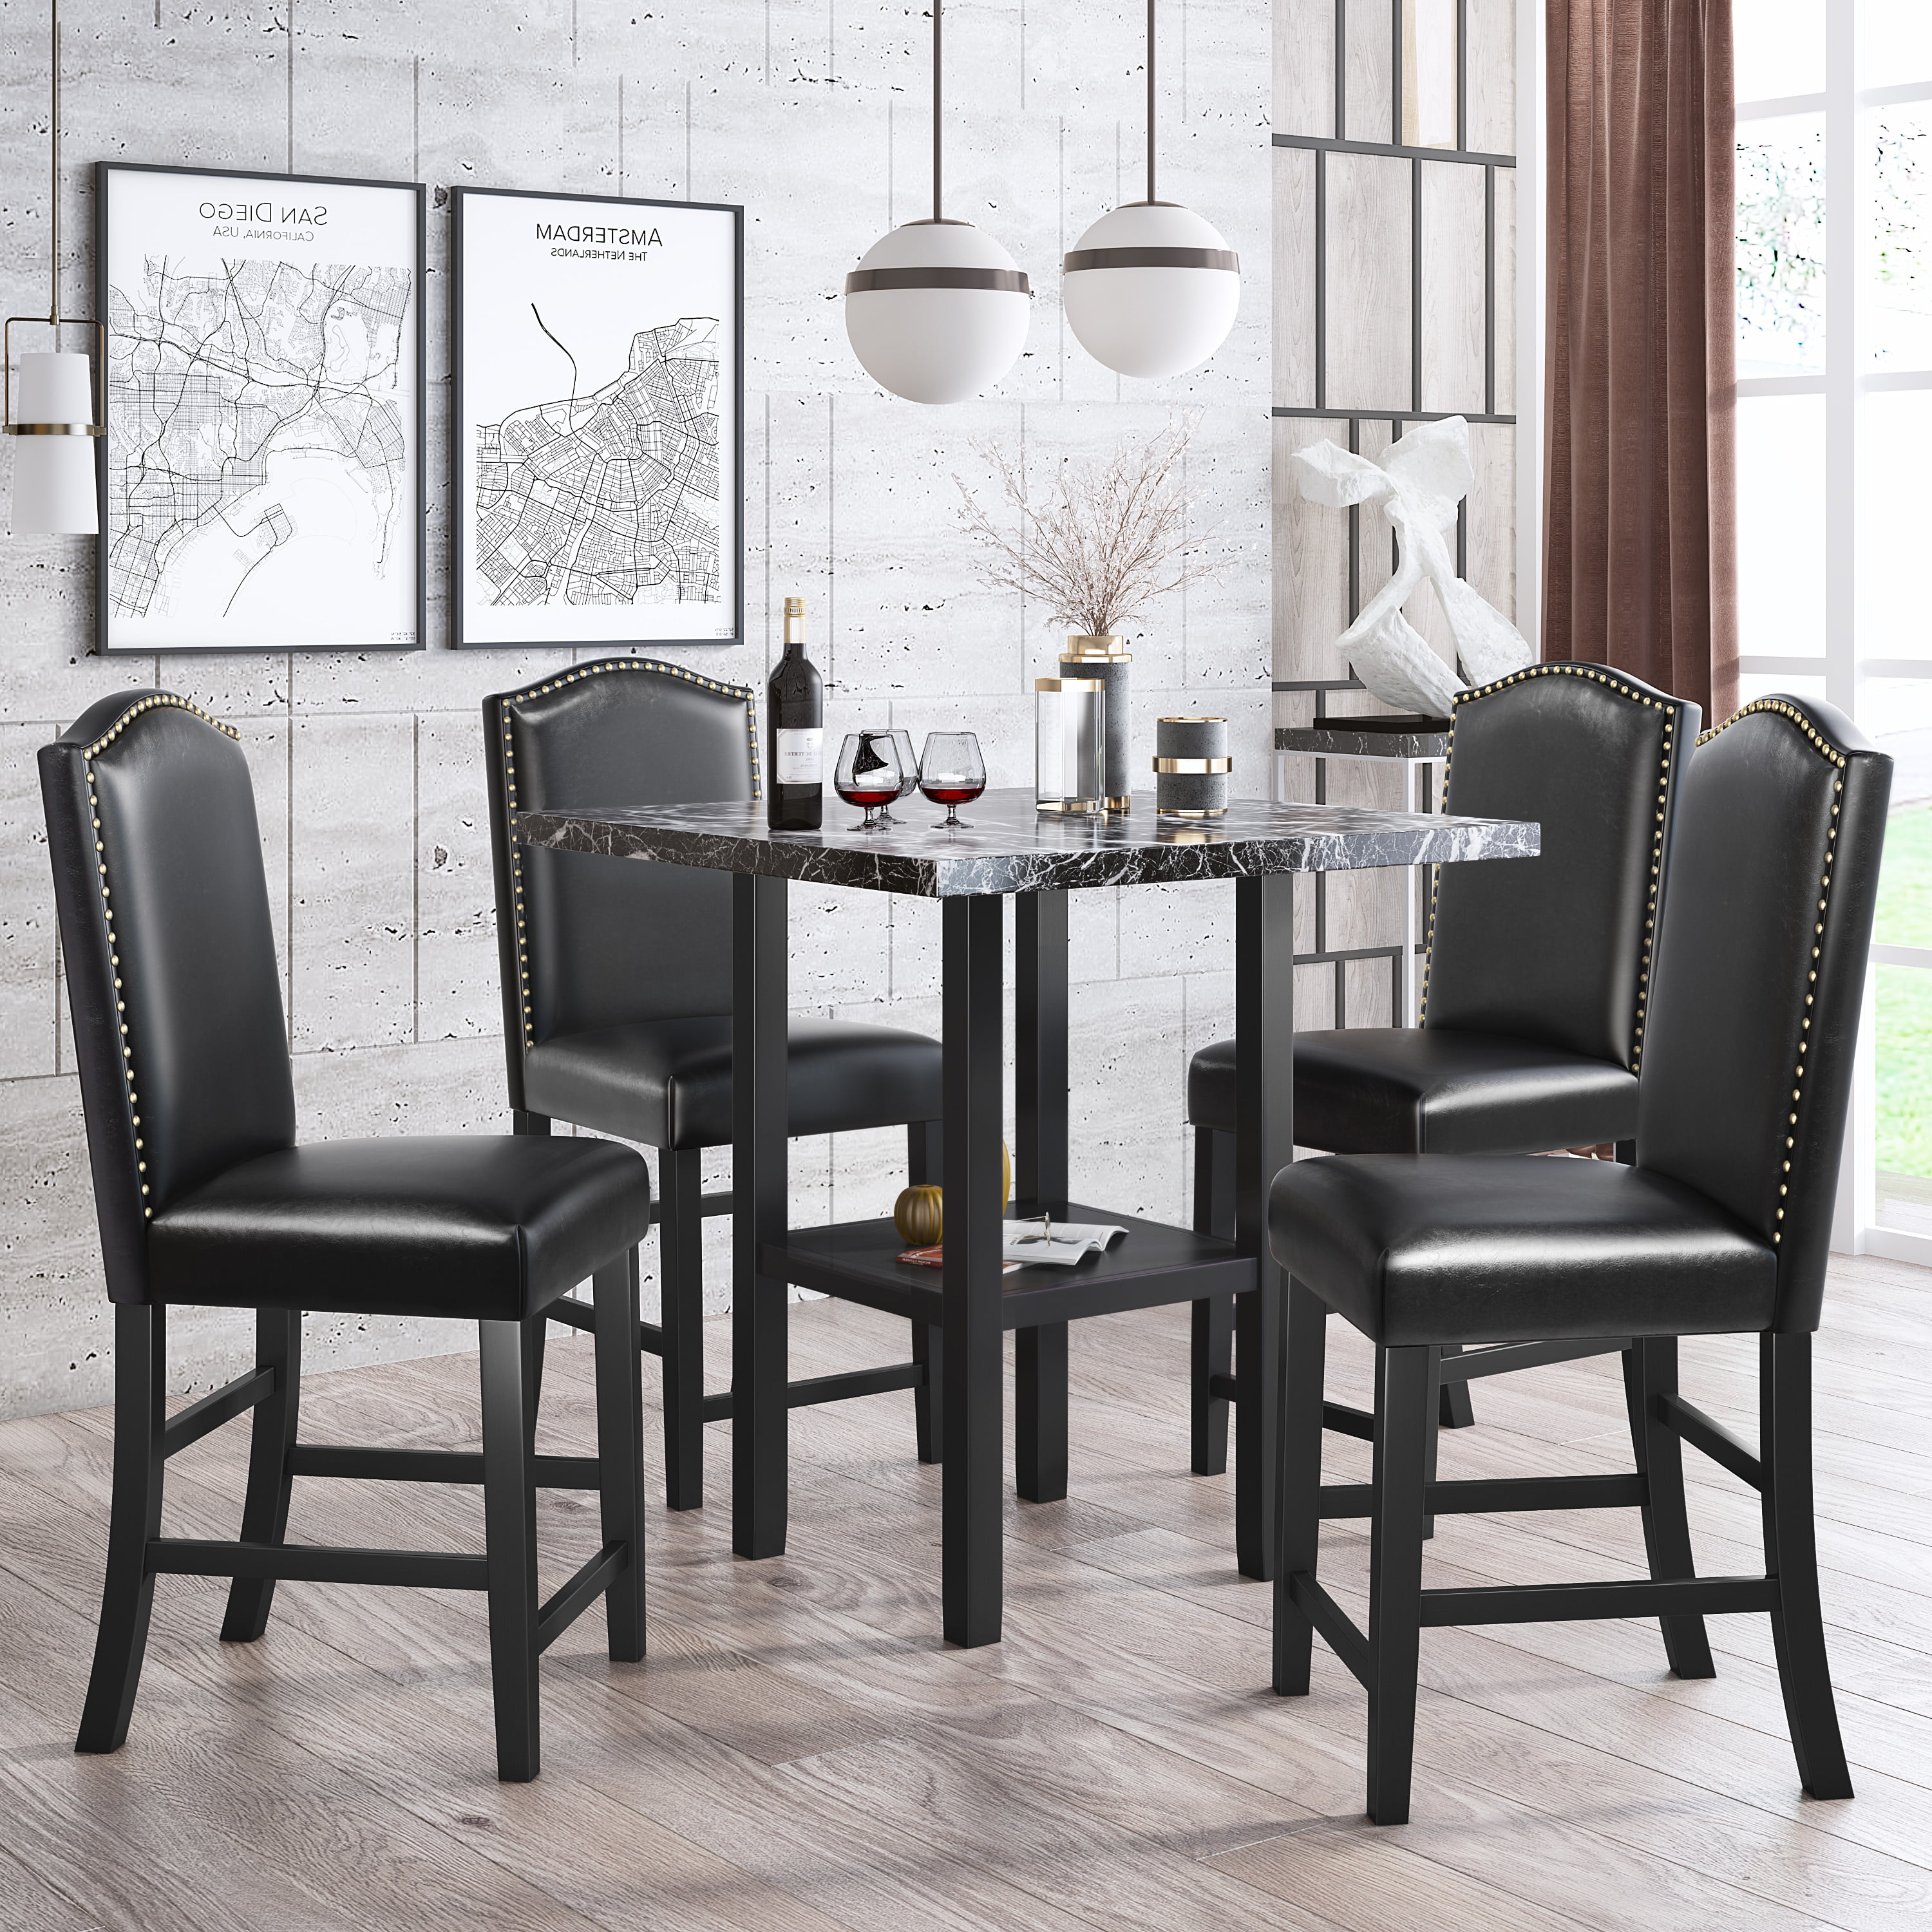 Chair Set Wooden Dining Room Table, Dining Room Chairs Set Of 4 Dark Wood